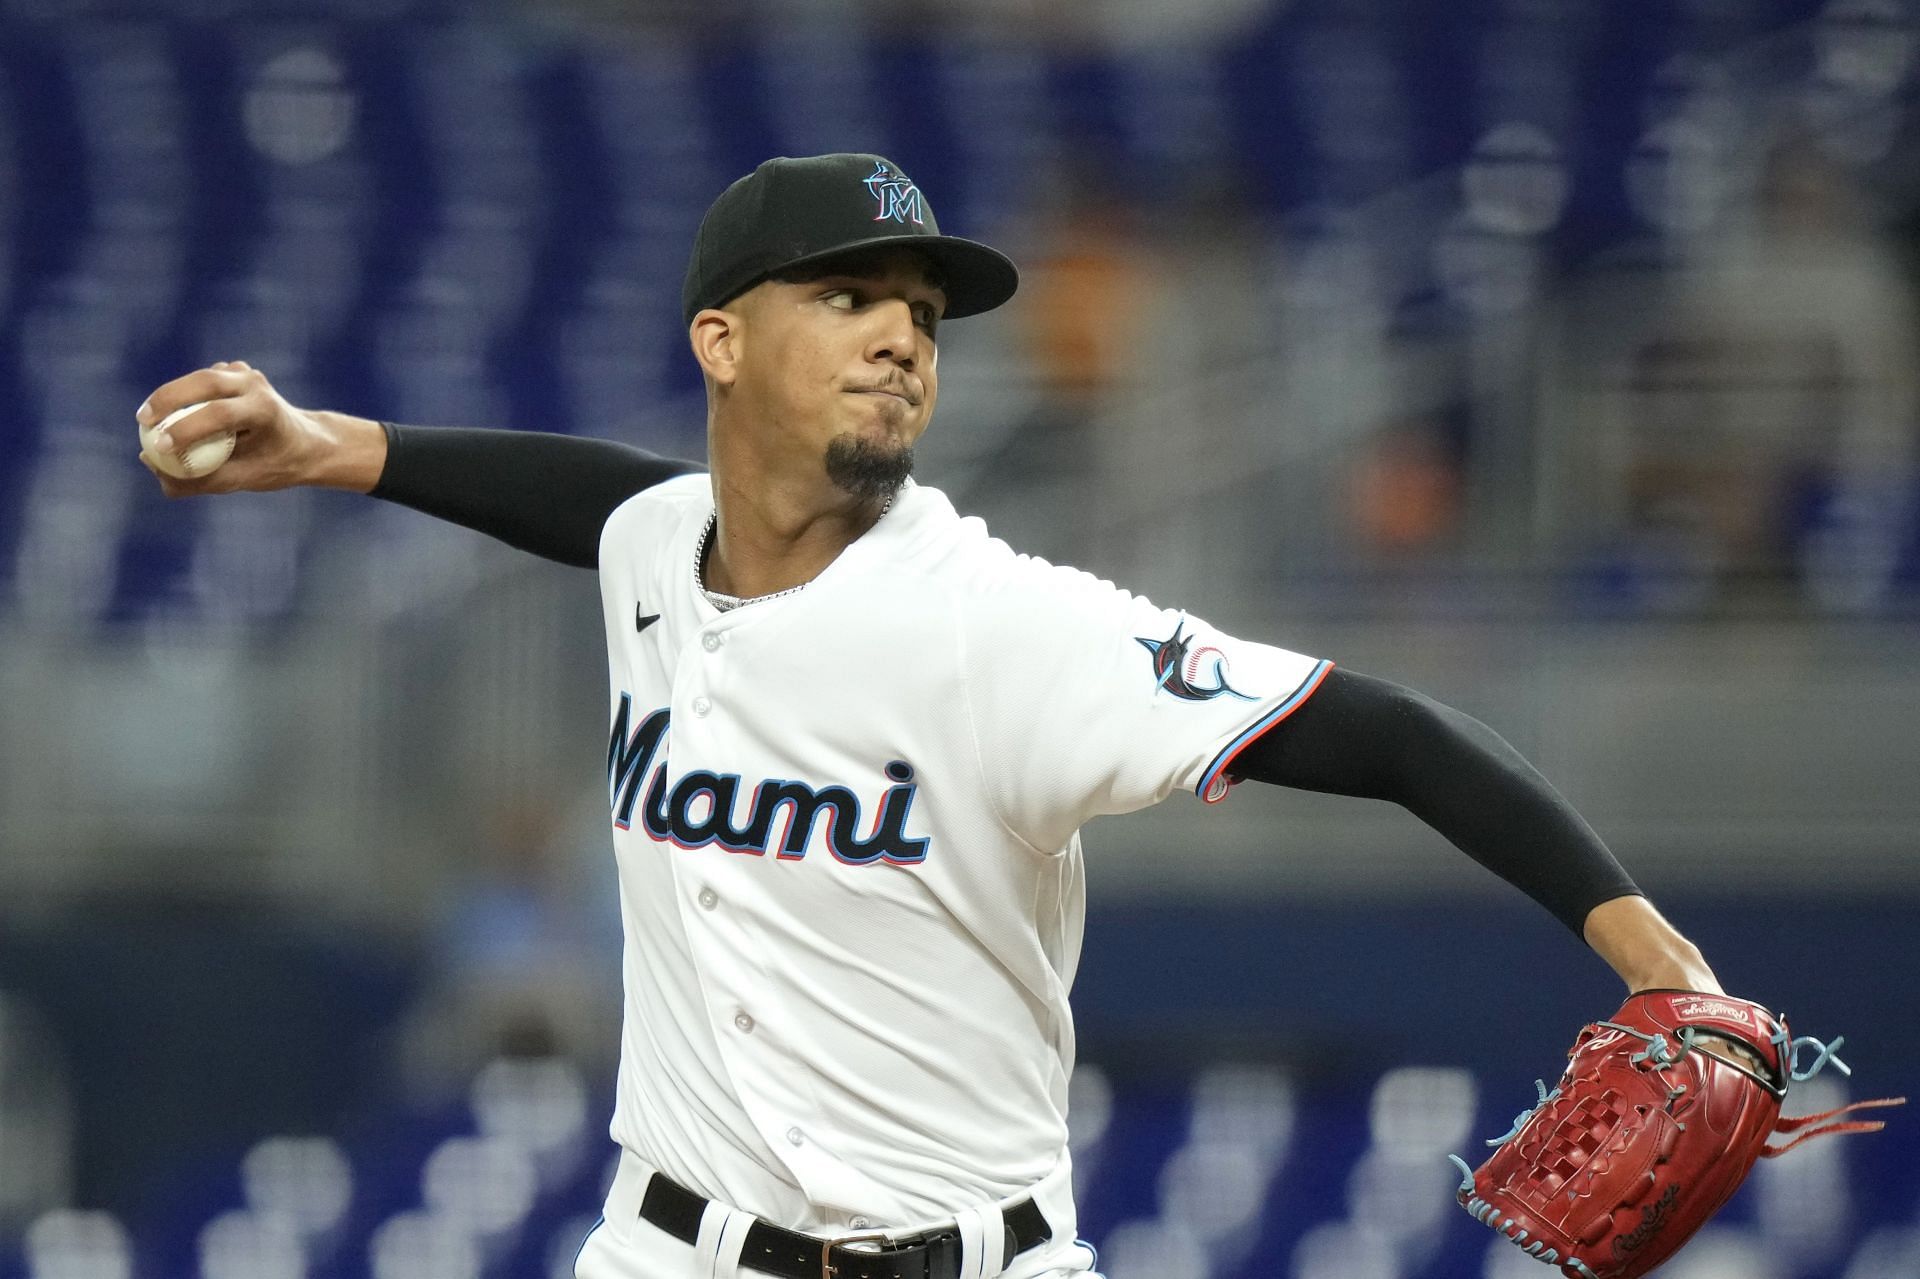 Eury Perez Injury Update: Marlins pitcher expected to return to